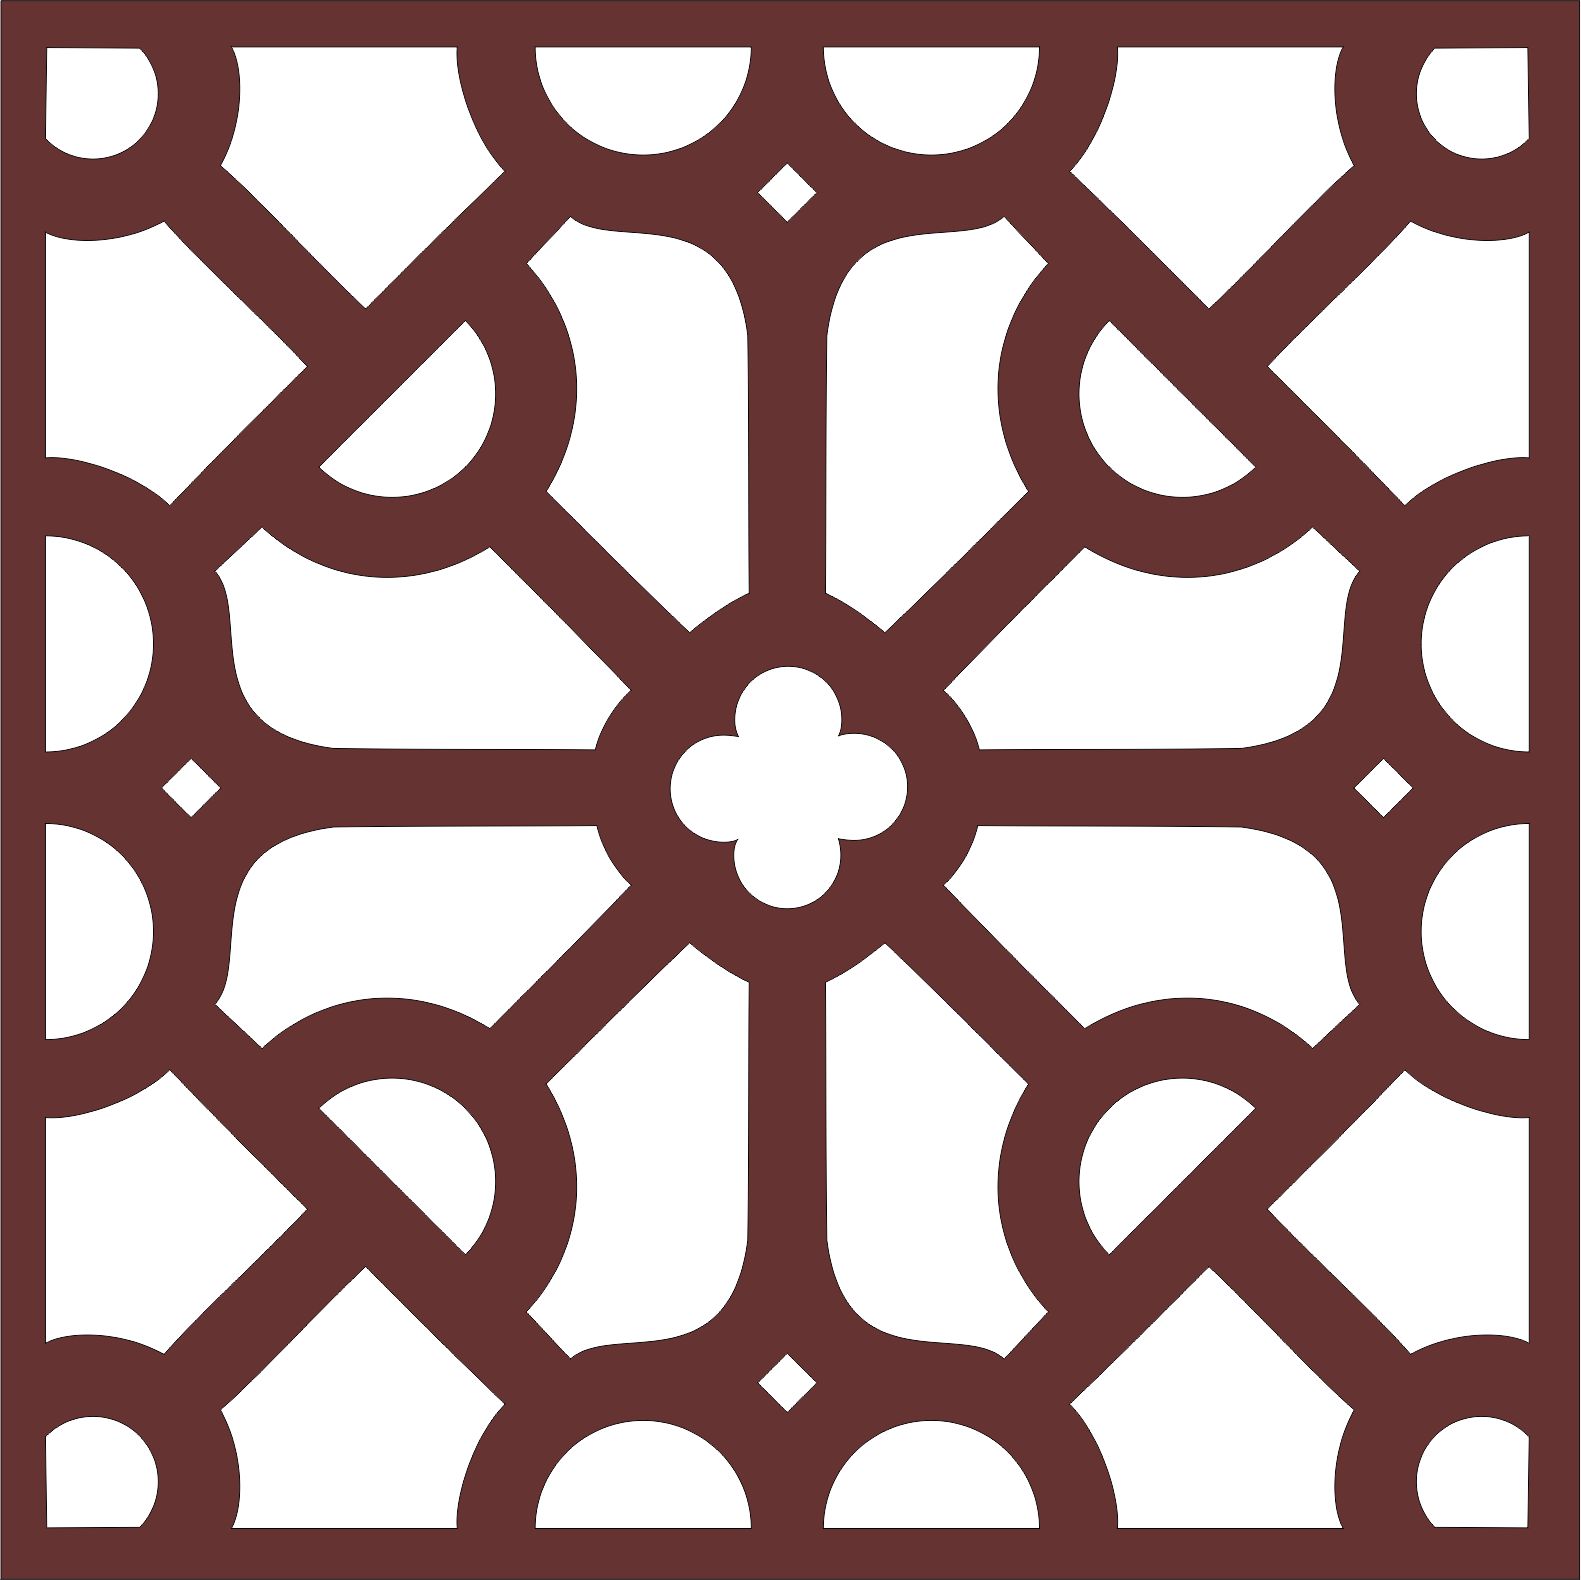 Laser Cut Decorative Privacy Screen Indoors Grill Room Divider Pattern Download Free Vector